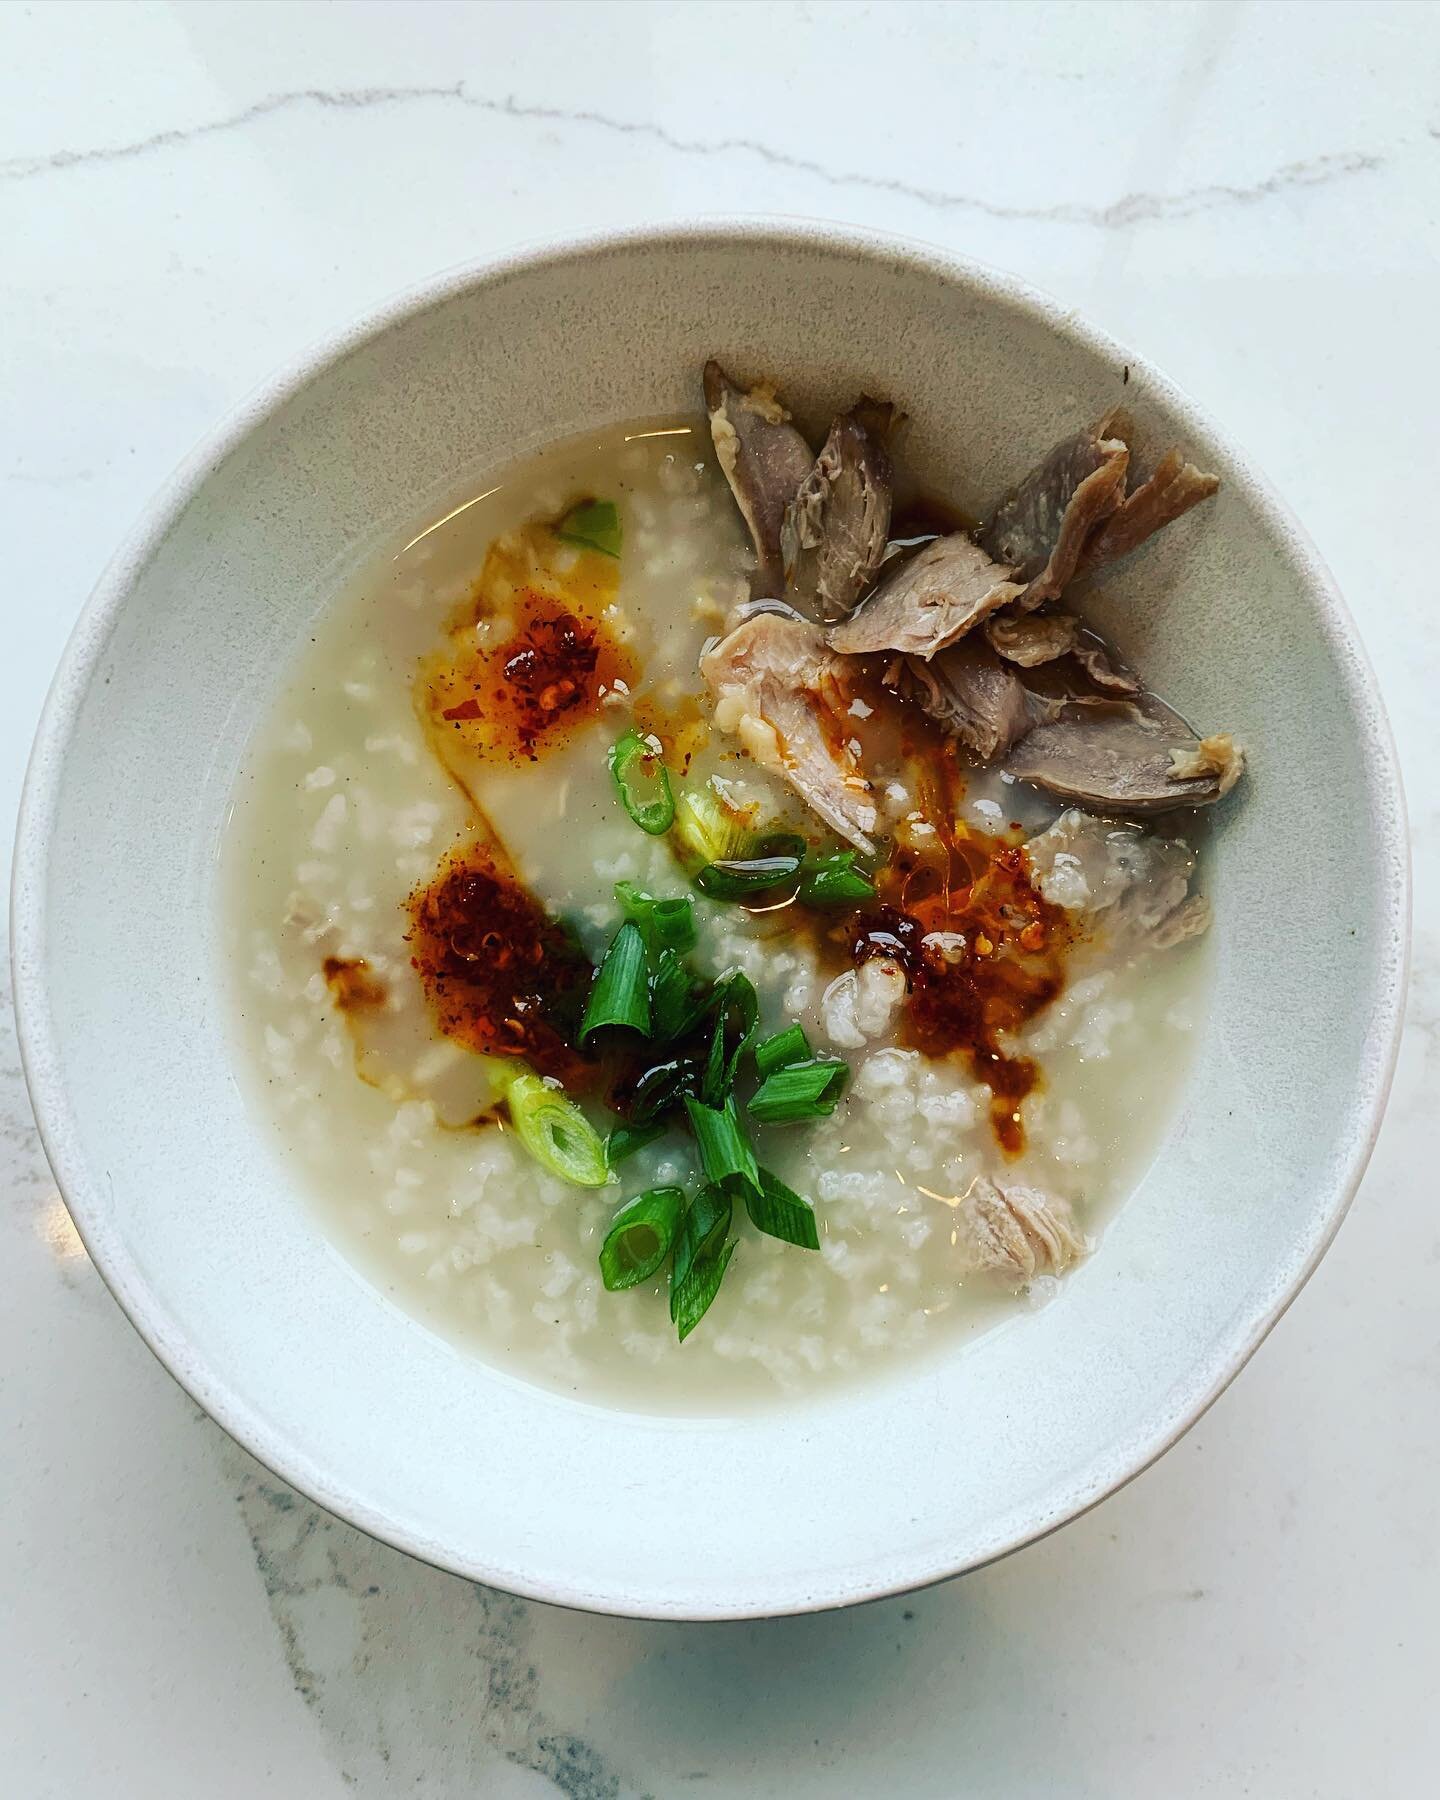 The mood is turn-your-Peking-duck-into-congee ; get with the program.